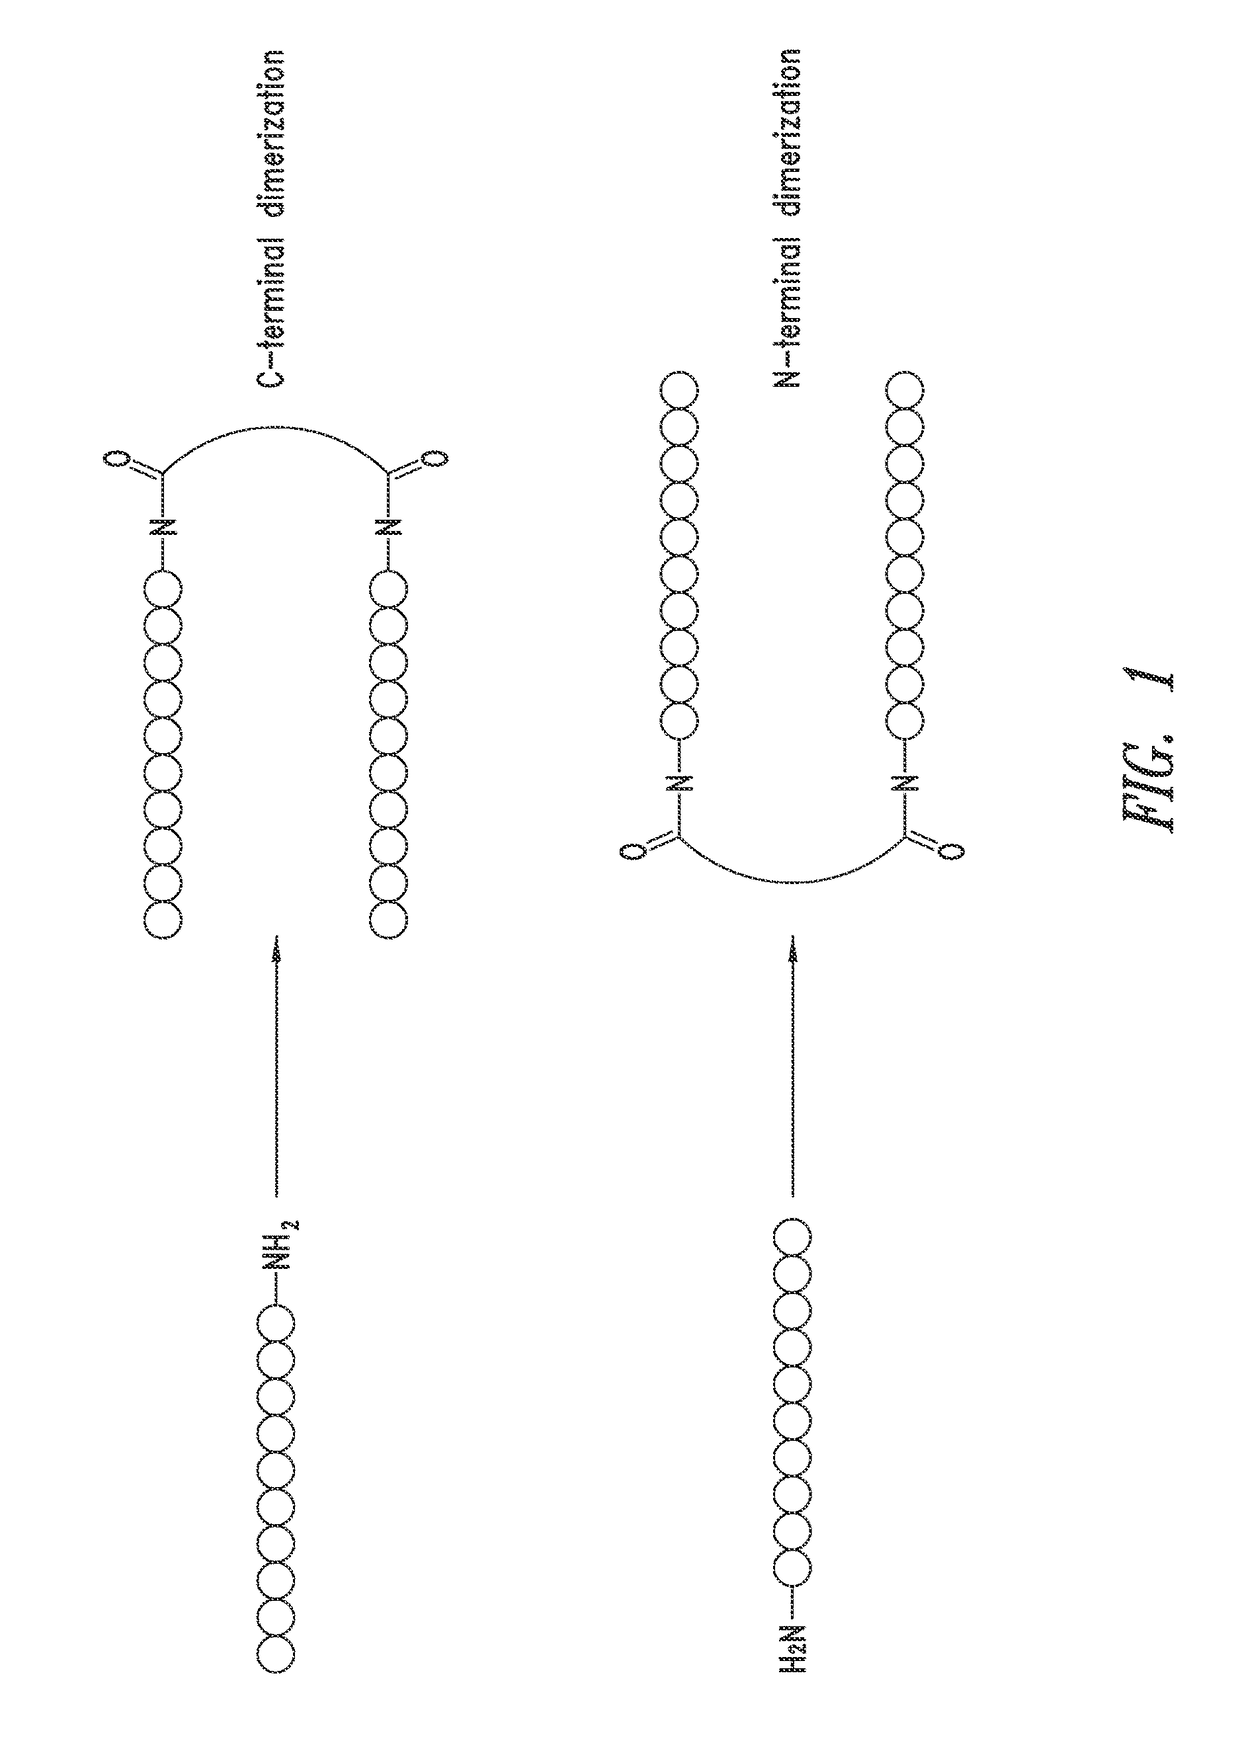 a4B7 integrin thioether peptide antagonists